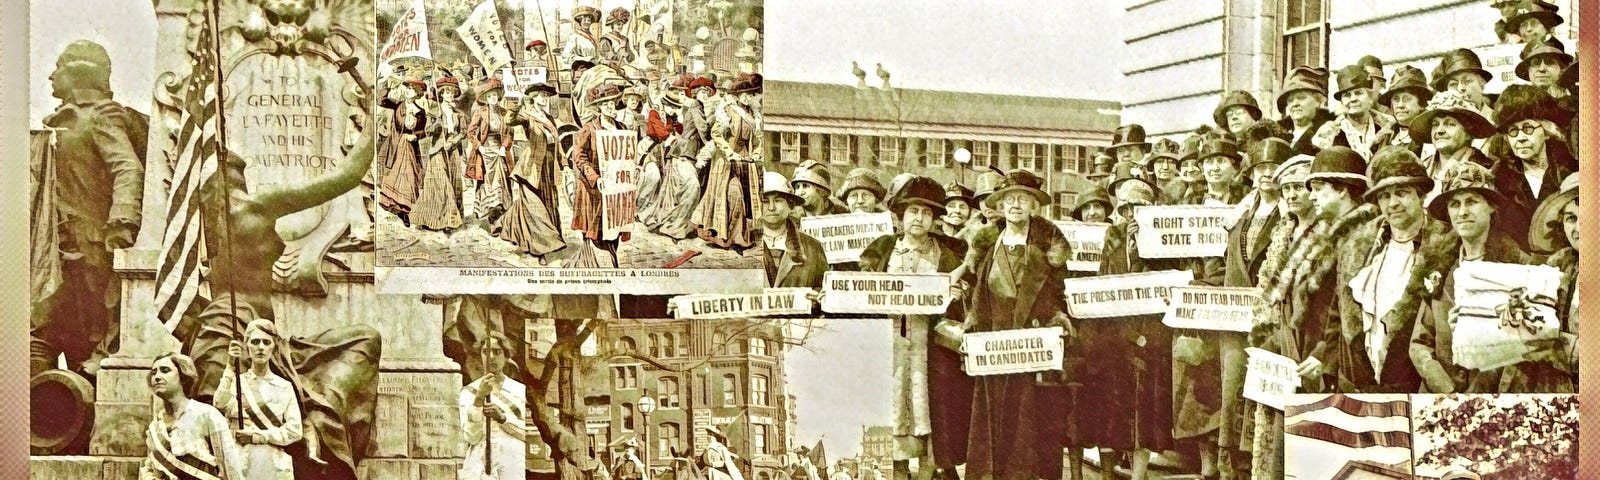 Several old photographs of groups of suffragettes